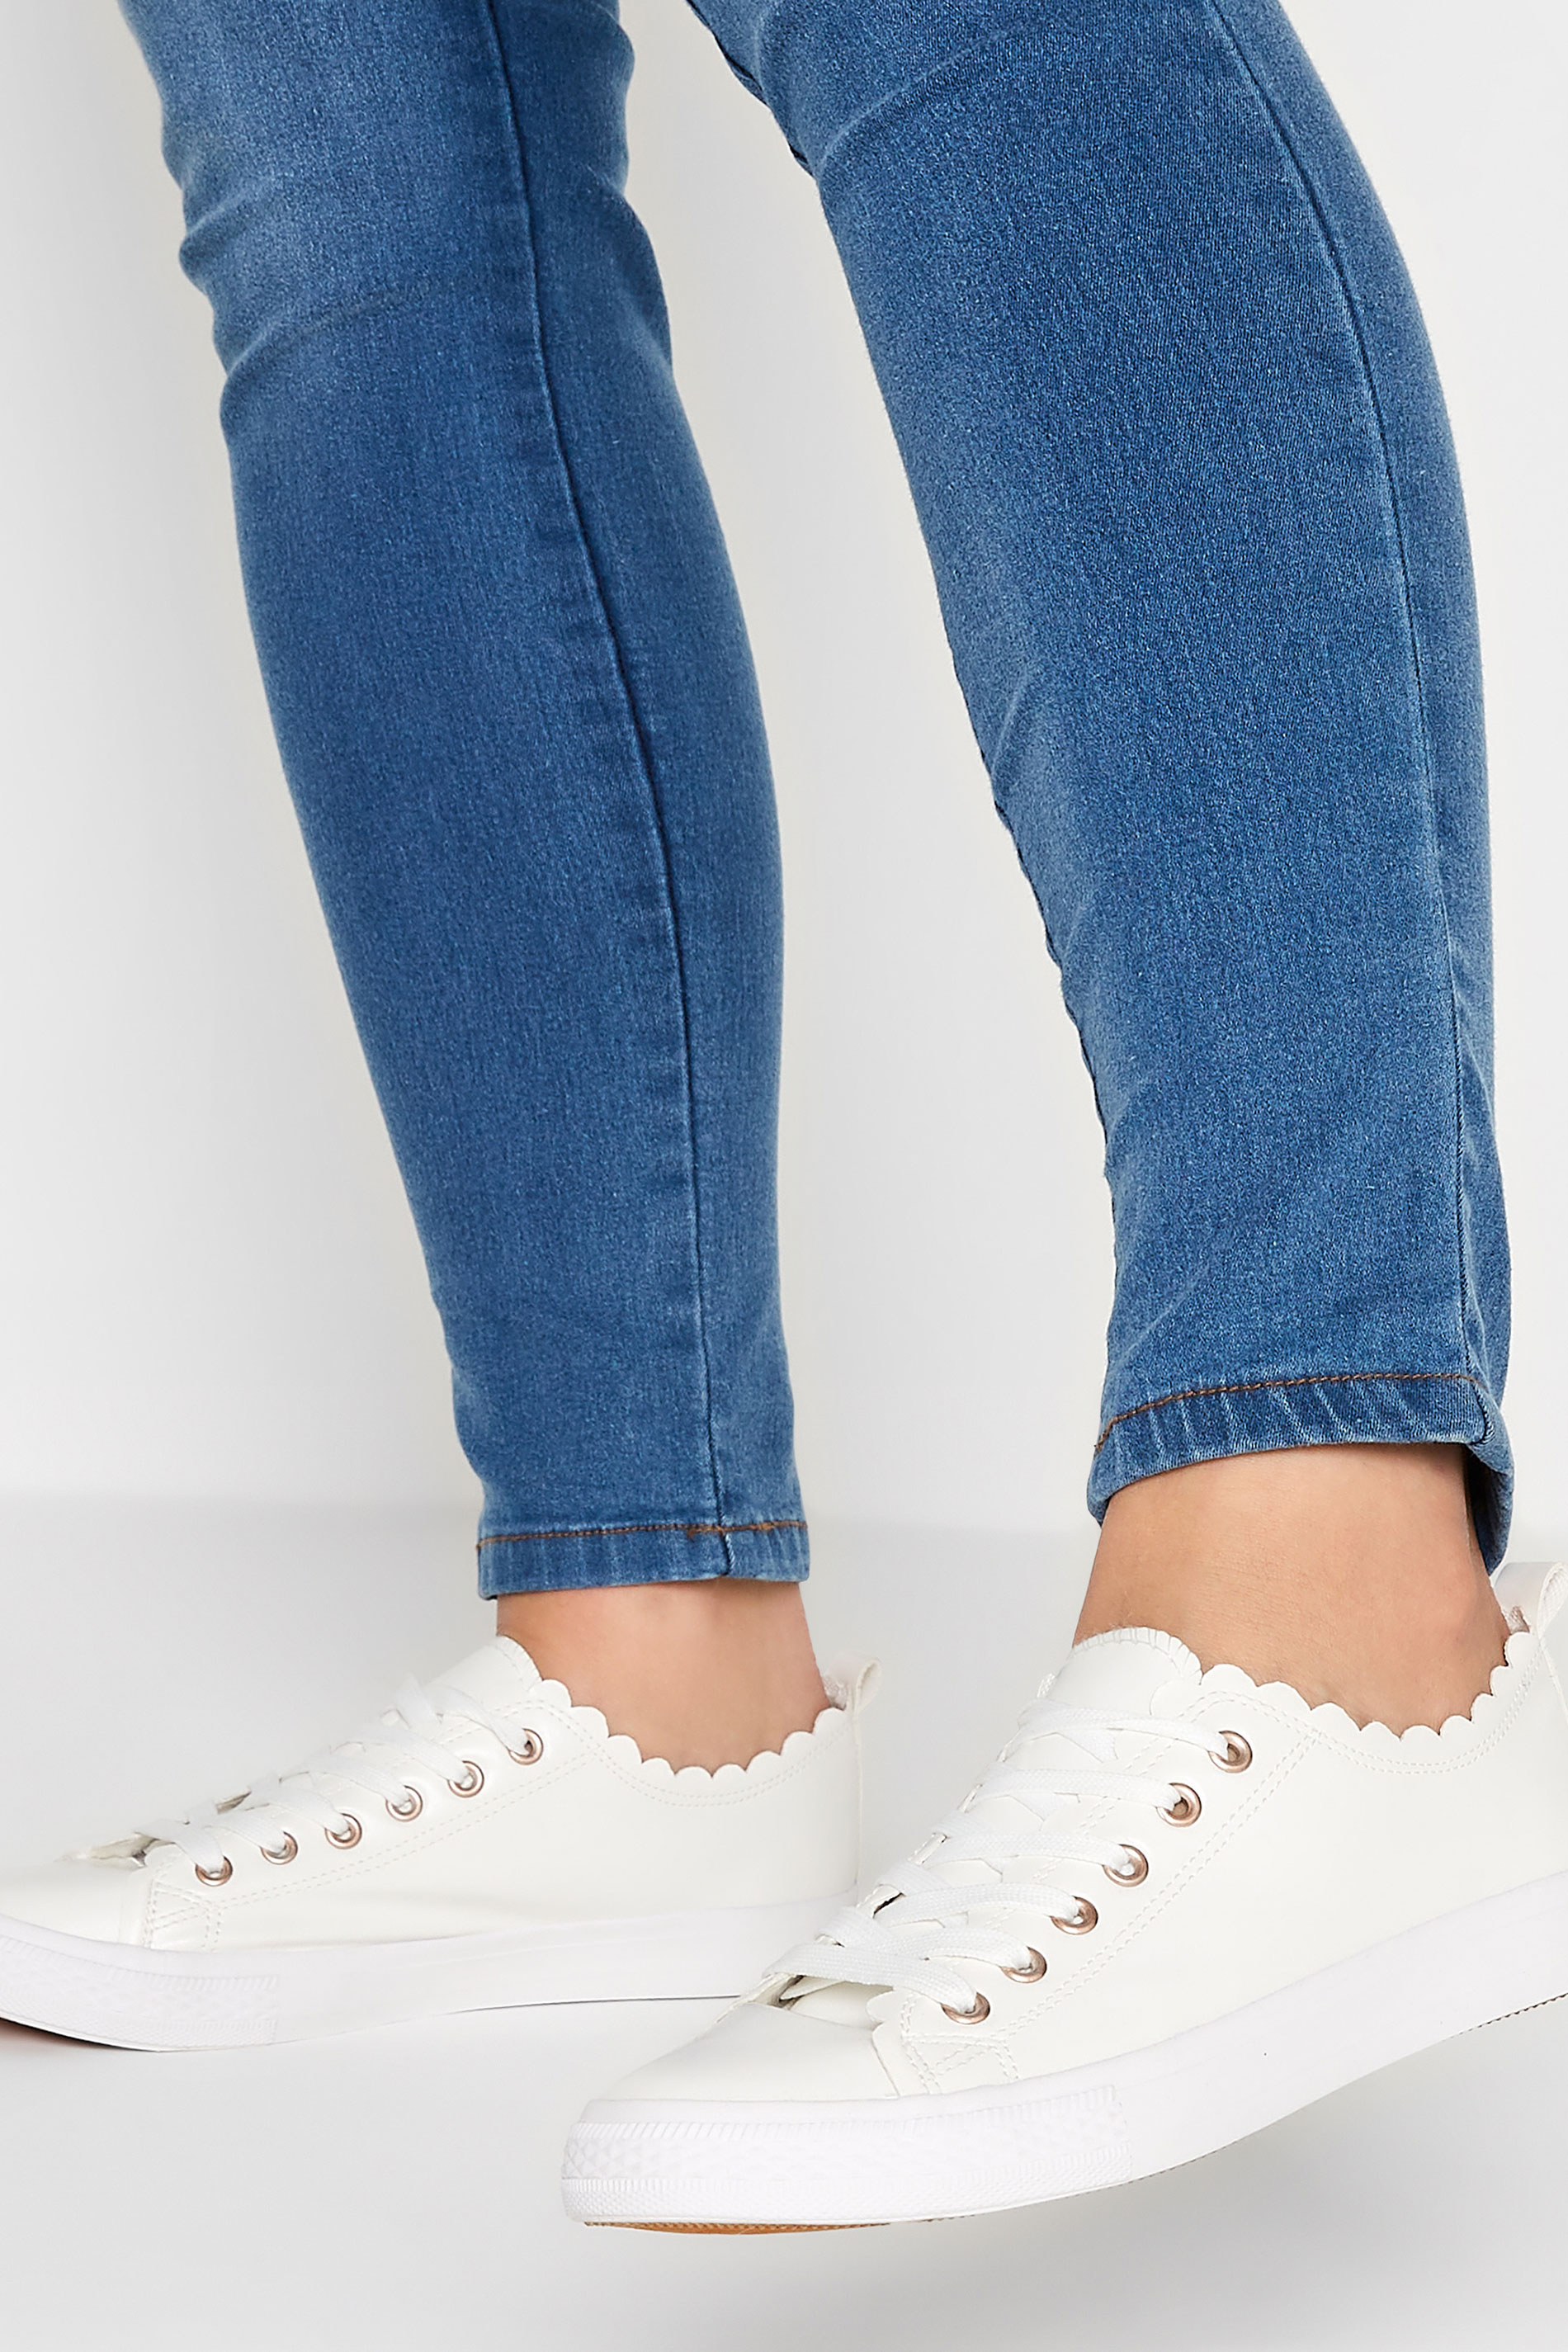 White Scalloped Edge Trainers In Extra Wide EEE Fit_M.jpg